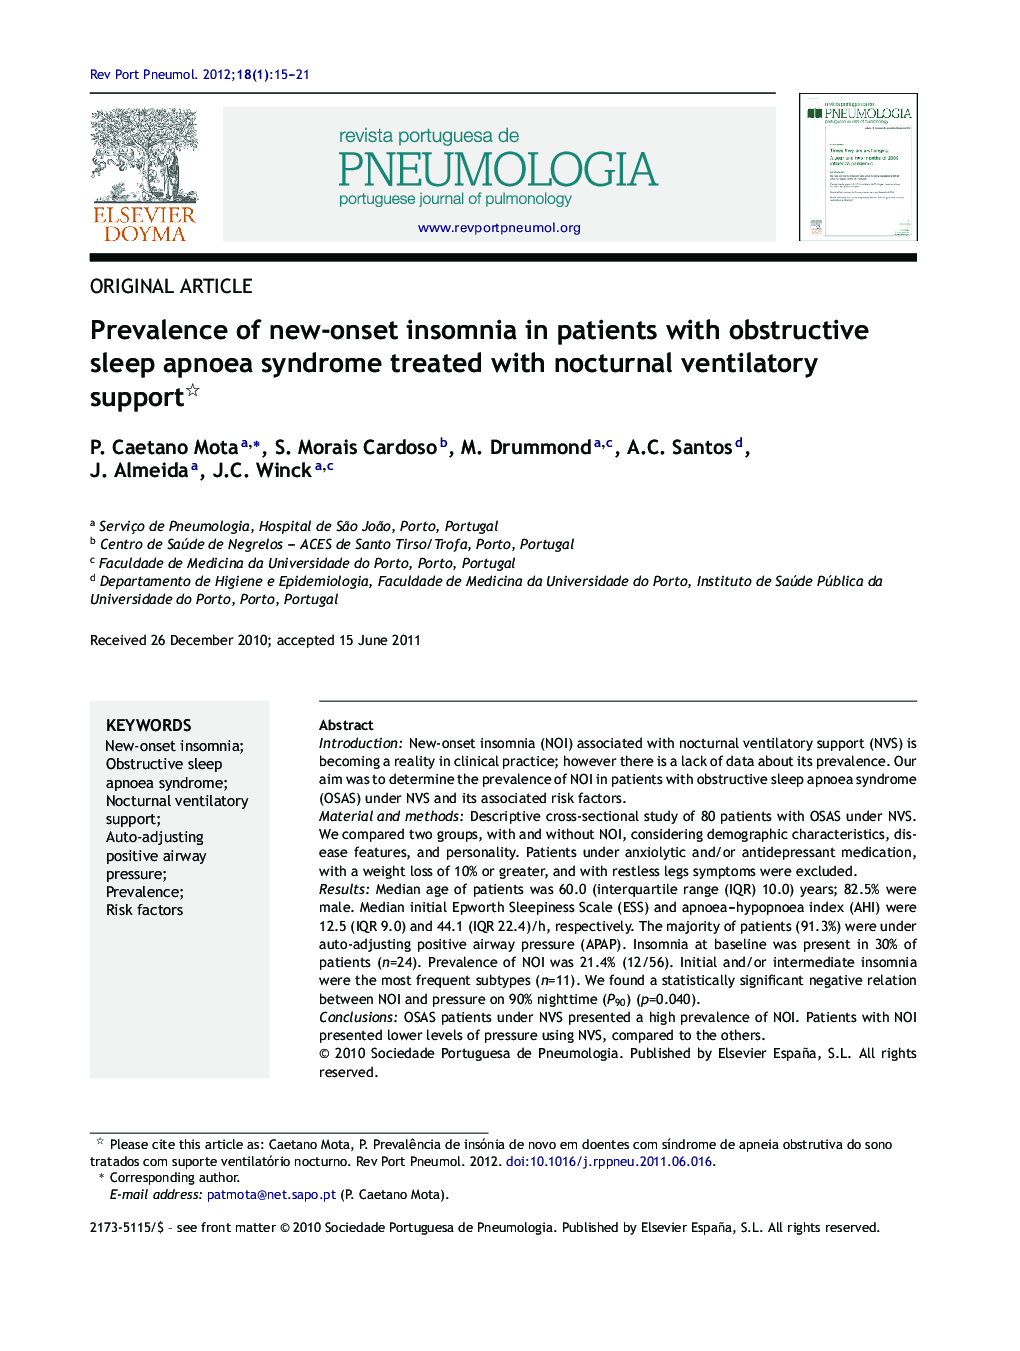 Prevalence of new-onset insomnia in patients with obstructive sleep apnoea syndrome treated with nocturnal ventilatory support